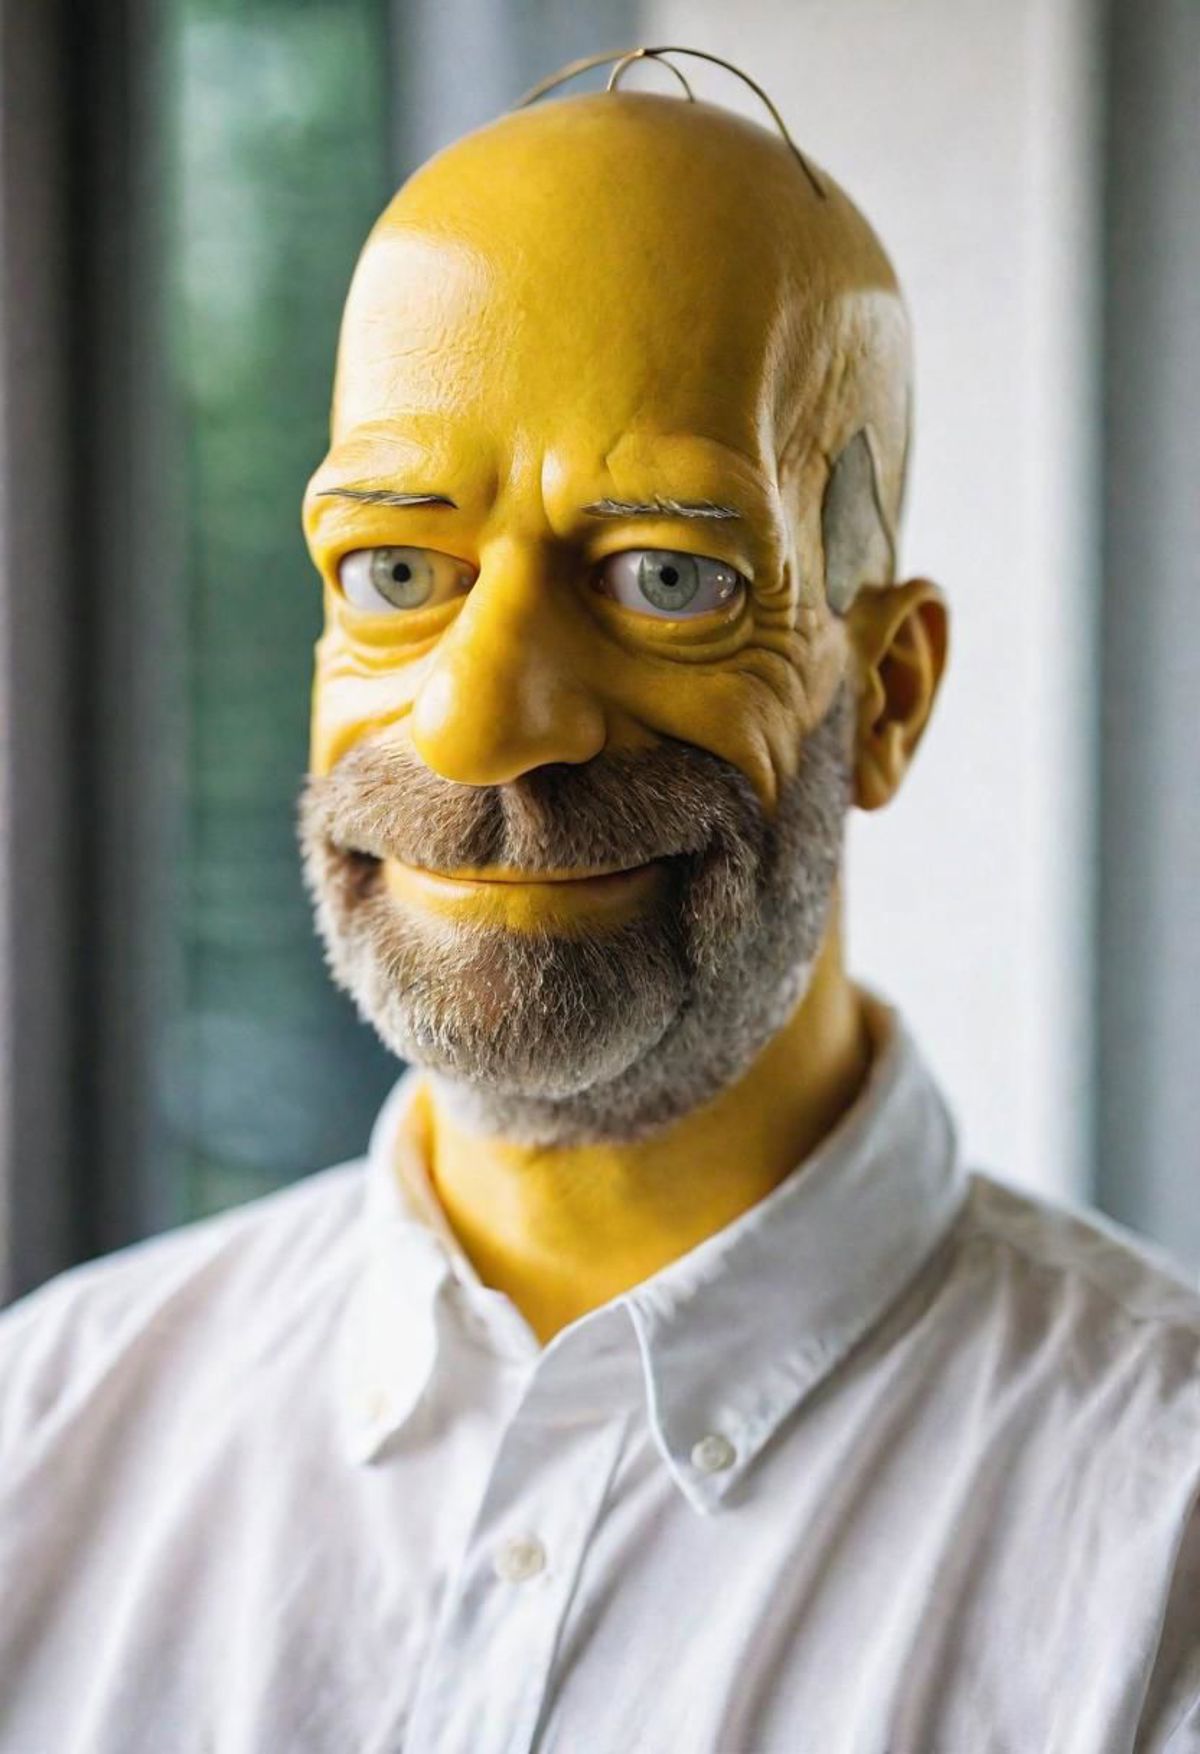 A man with a yellow face and blue eyes.